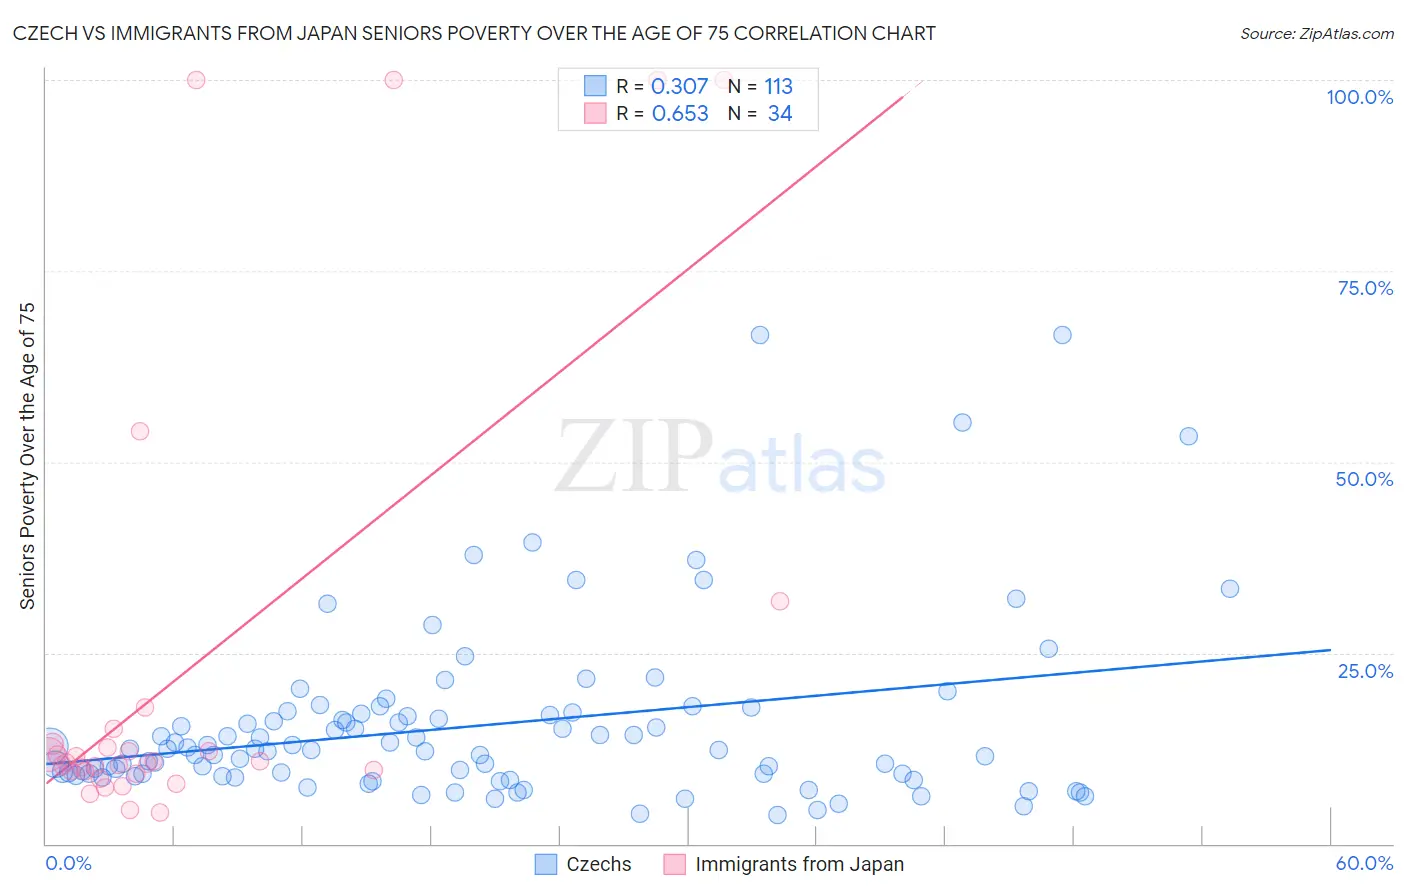 Czech vs Immigrants from Japan Seniors Poverty Over the Age of 75